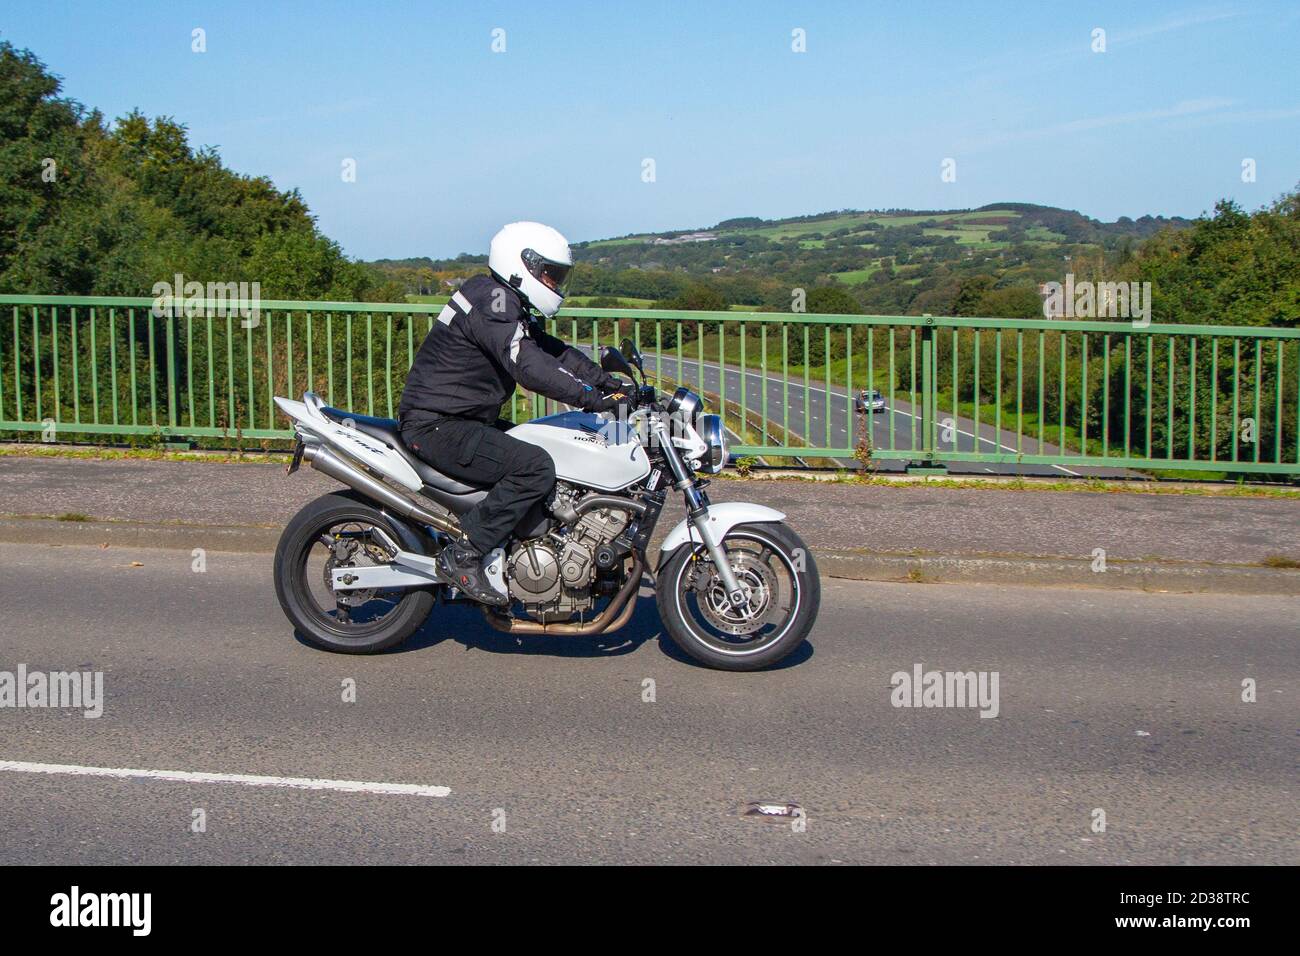 Honda Hornet High Resolution Stock Photography And Images Alamy